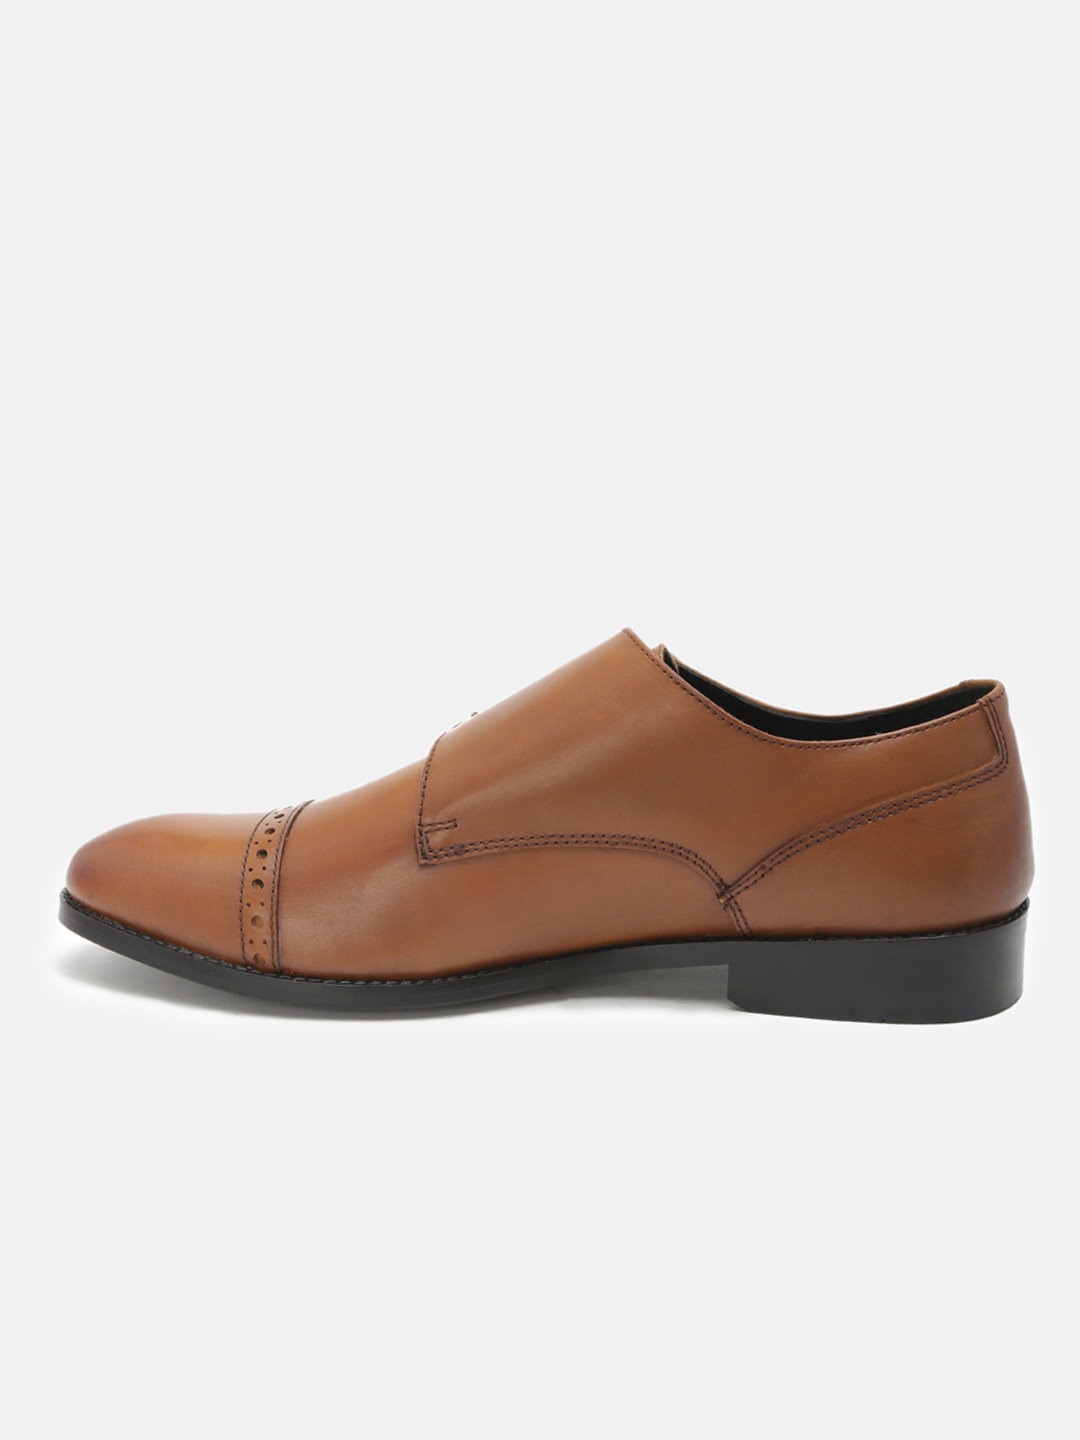 Buy Online Genuine Leather Tan Double Monk Shoes For Men's